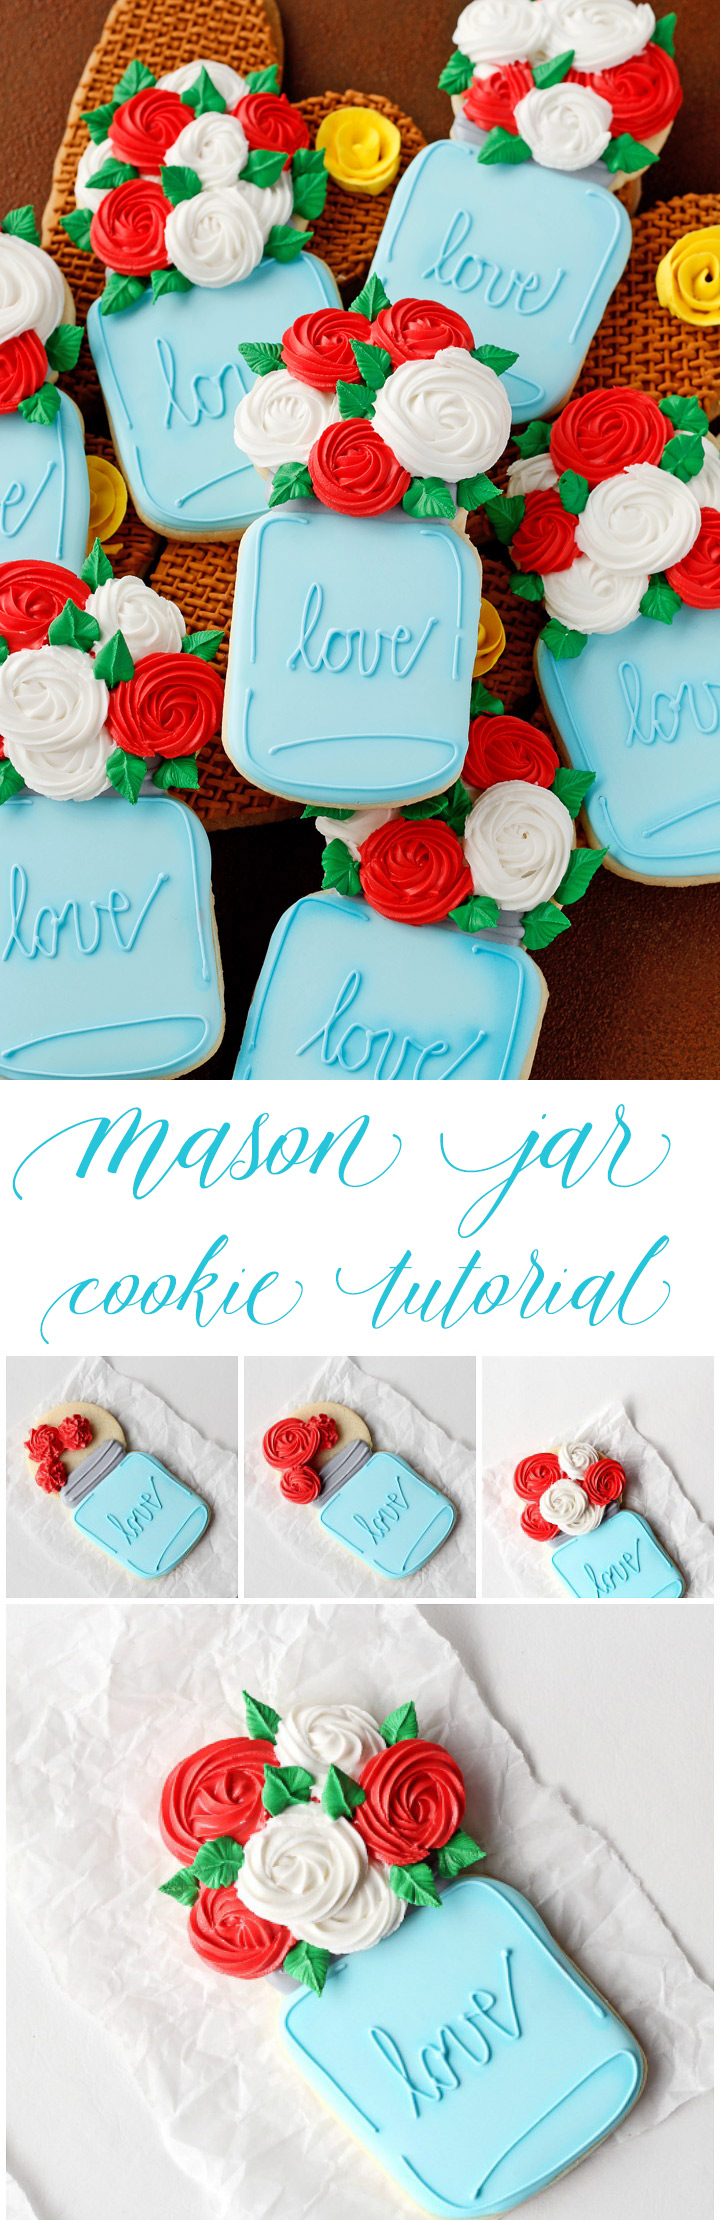 How to Decorate Mason Jar Cookies with a How to Video | The Bearfoot Baker